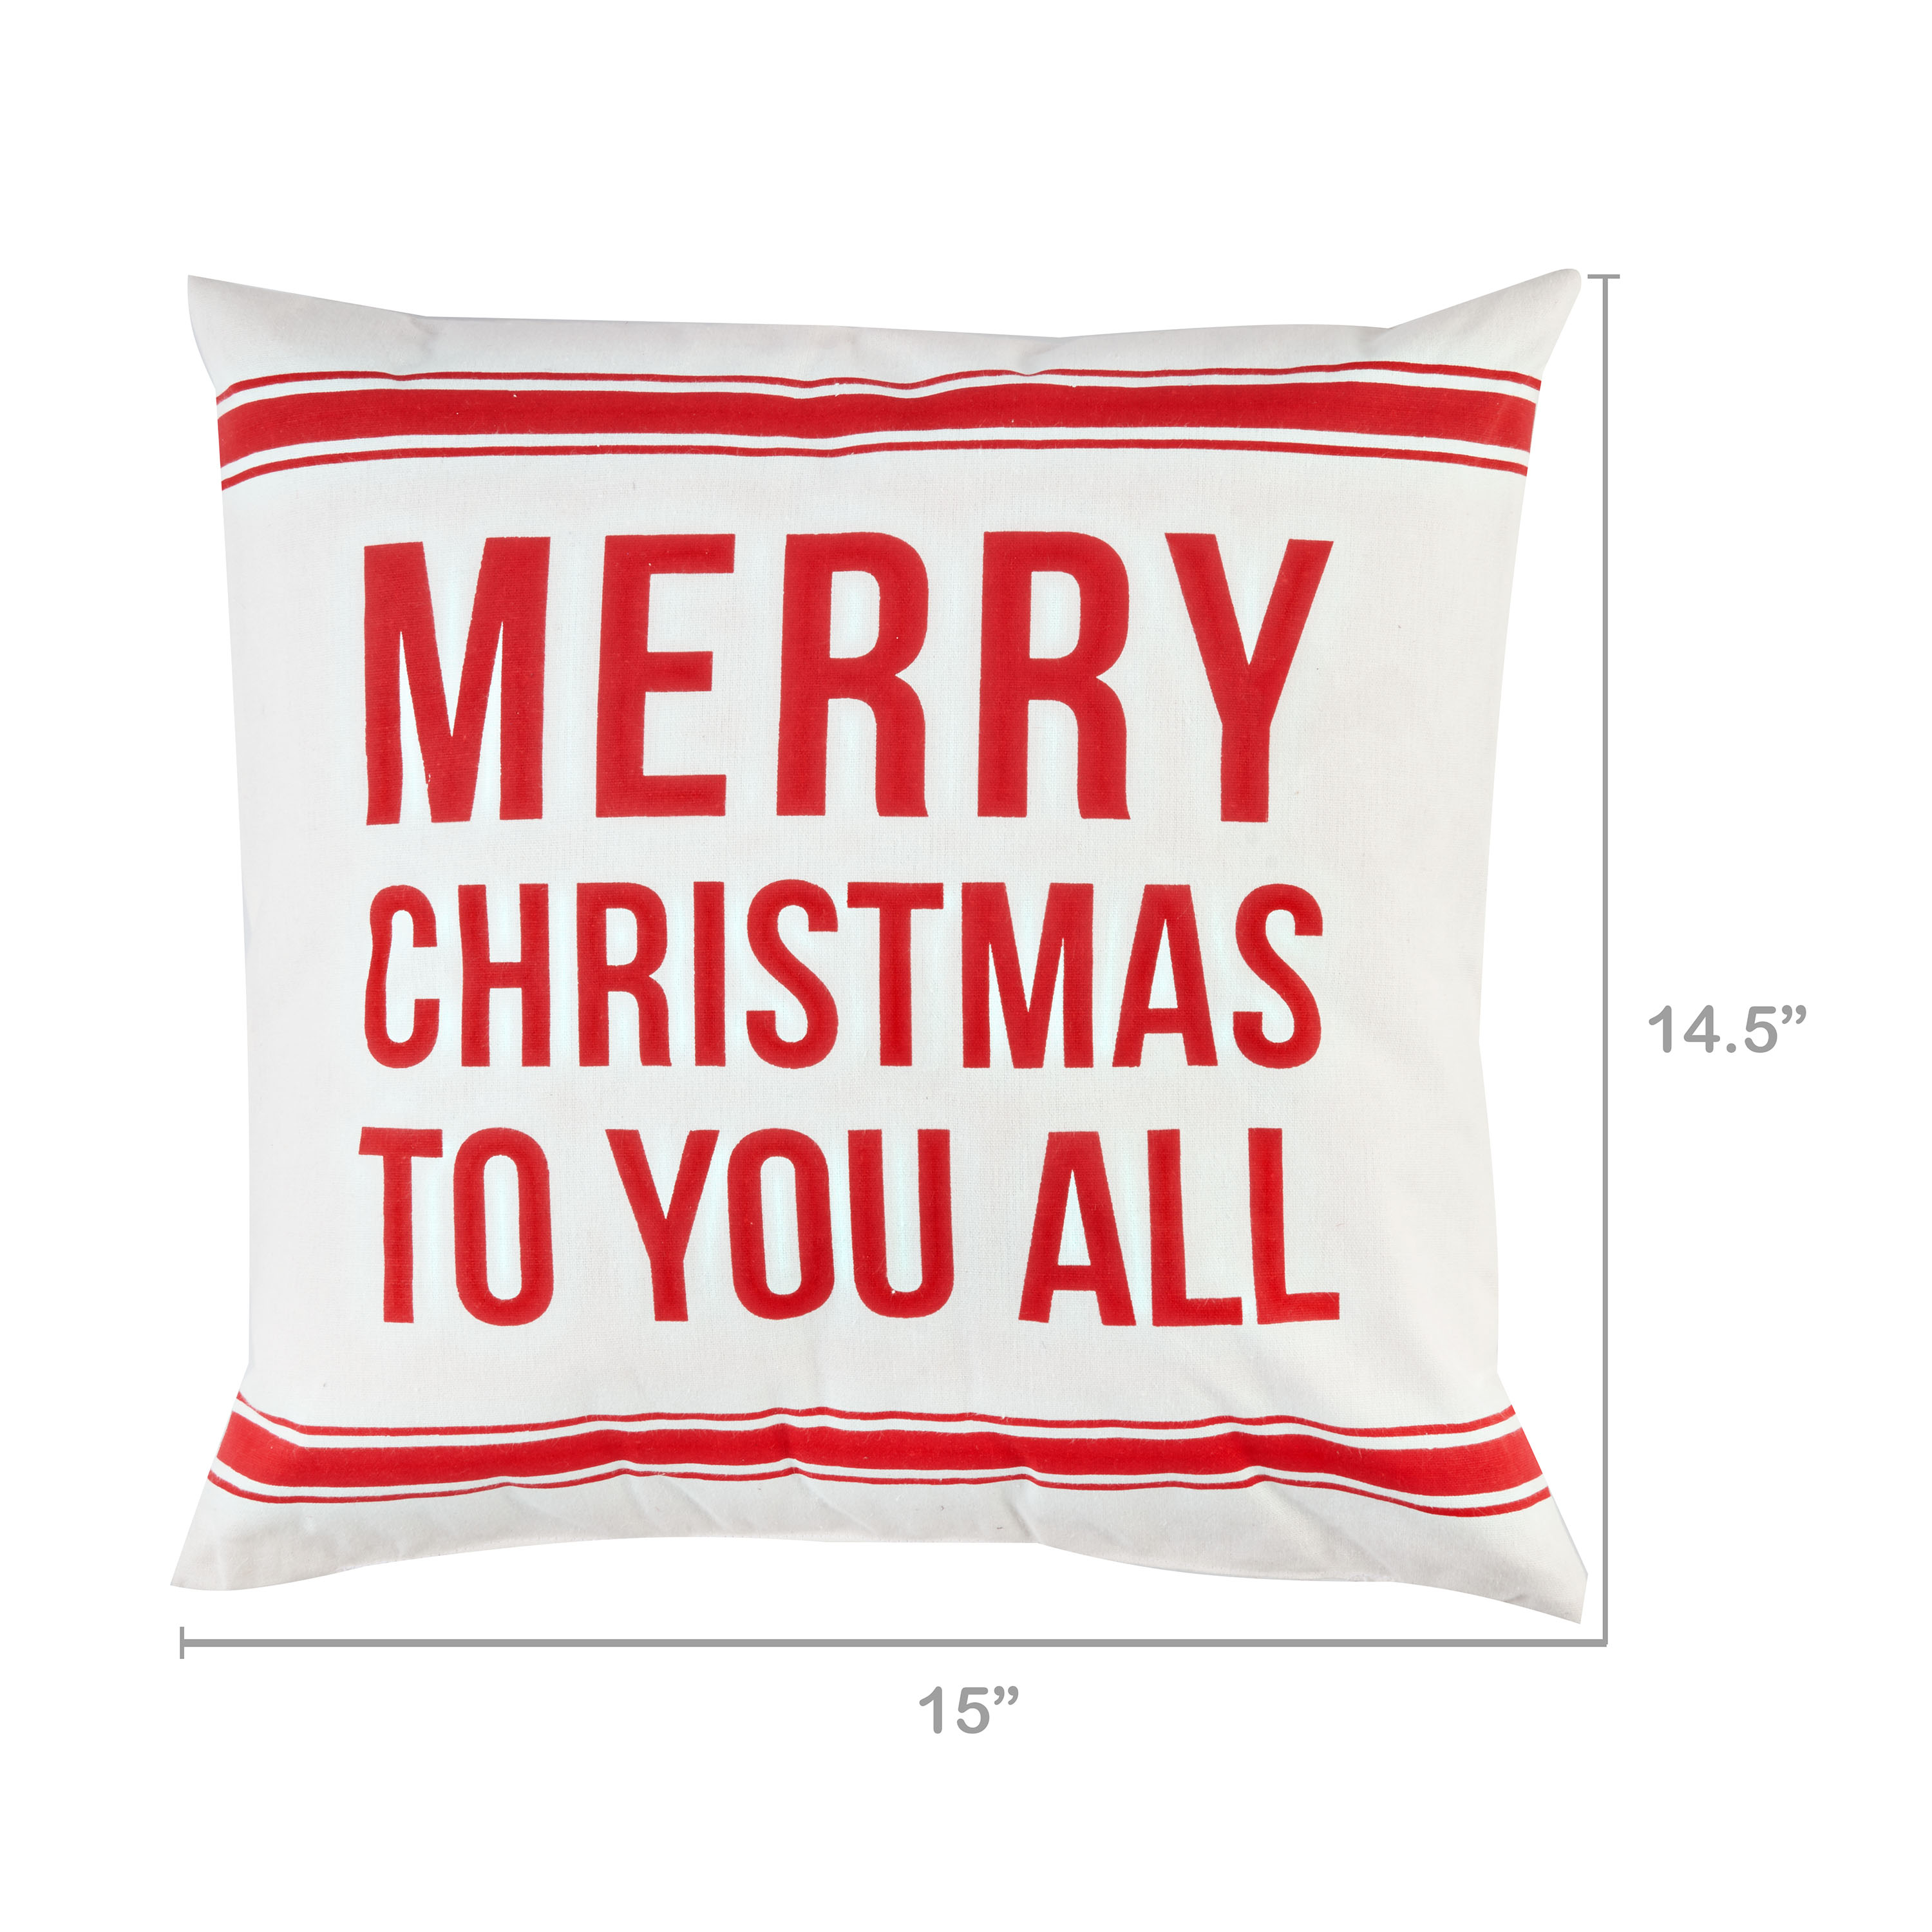 Holiday Time Merry Christmas to You All Decorative Throw Pillow, 16" x 16", White - image 5 of 5